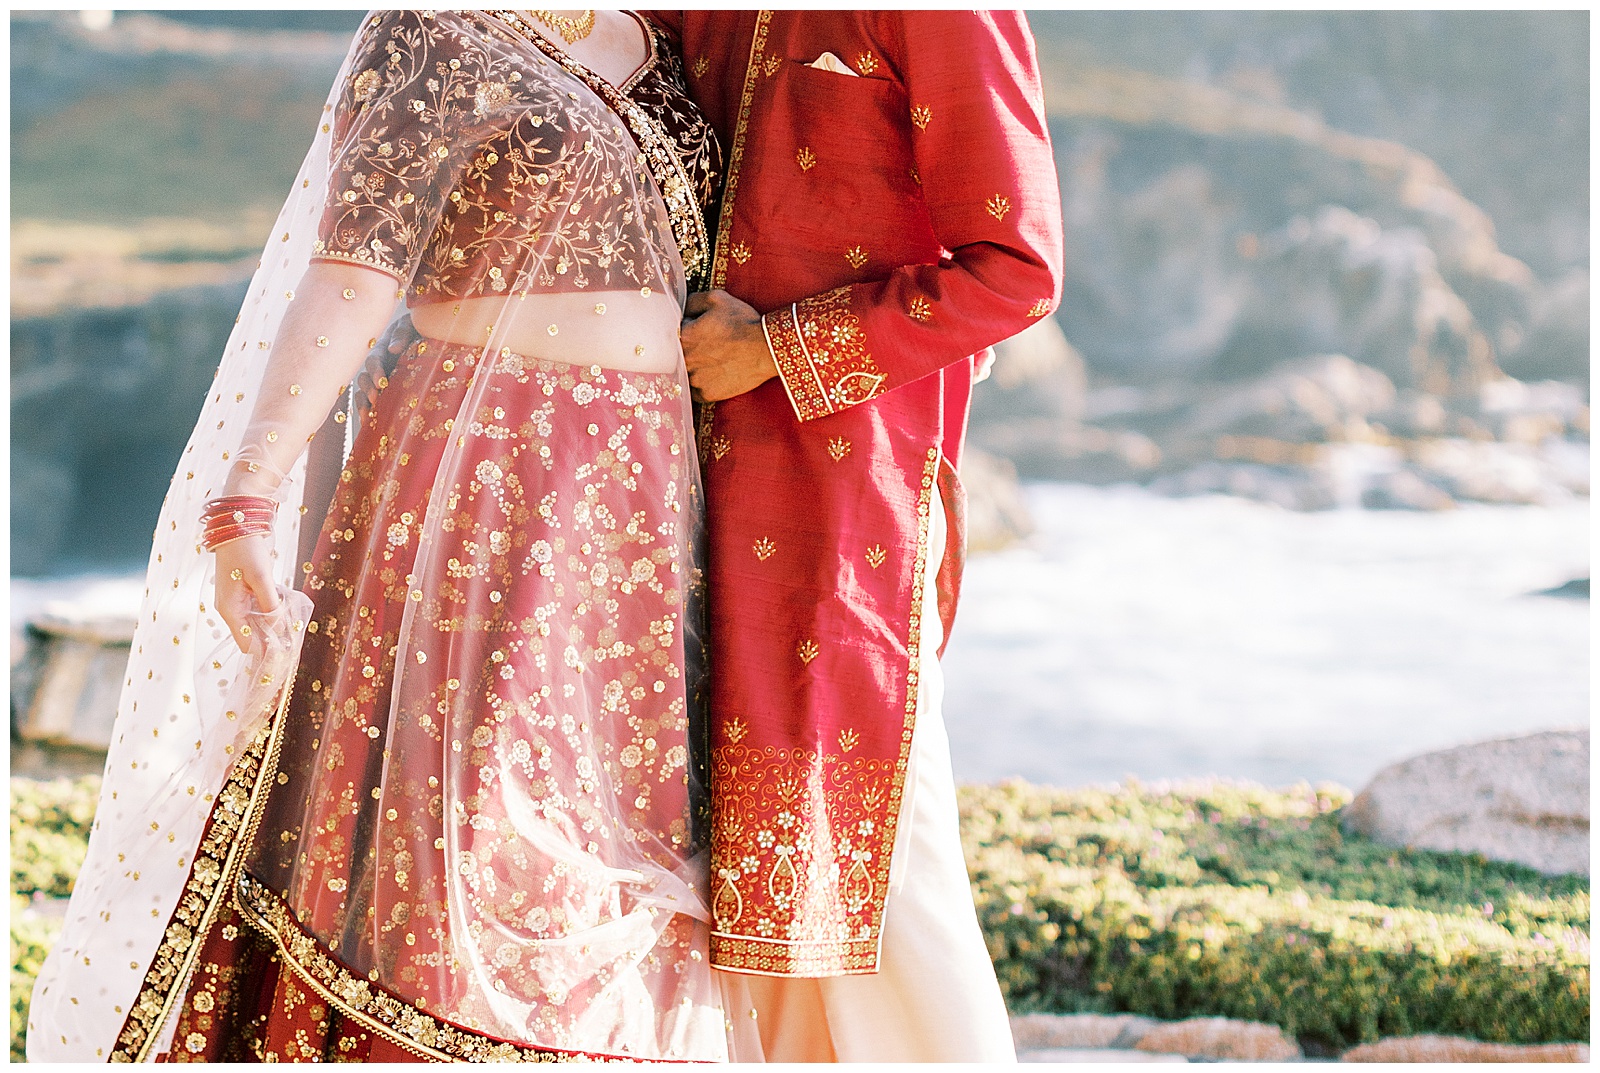 close up details of red and gold indian wedding clothing